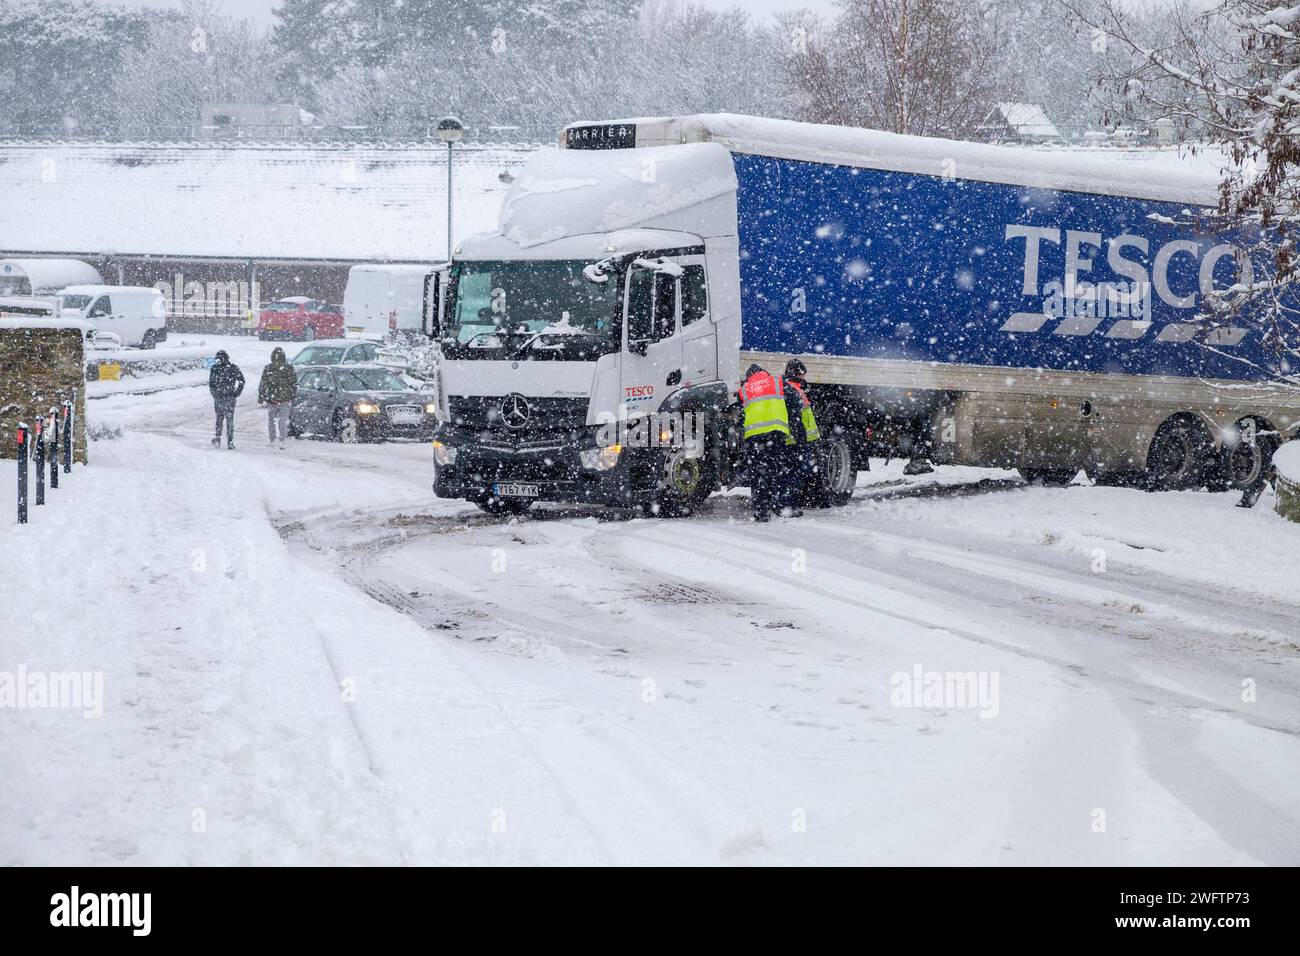 Tesco staff in Chippenham are pictured as they try to free a Tesco delivery truck that has become stuck due to the snow and ice outside the store. Stock Photo